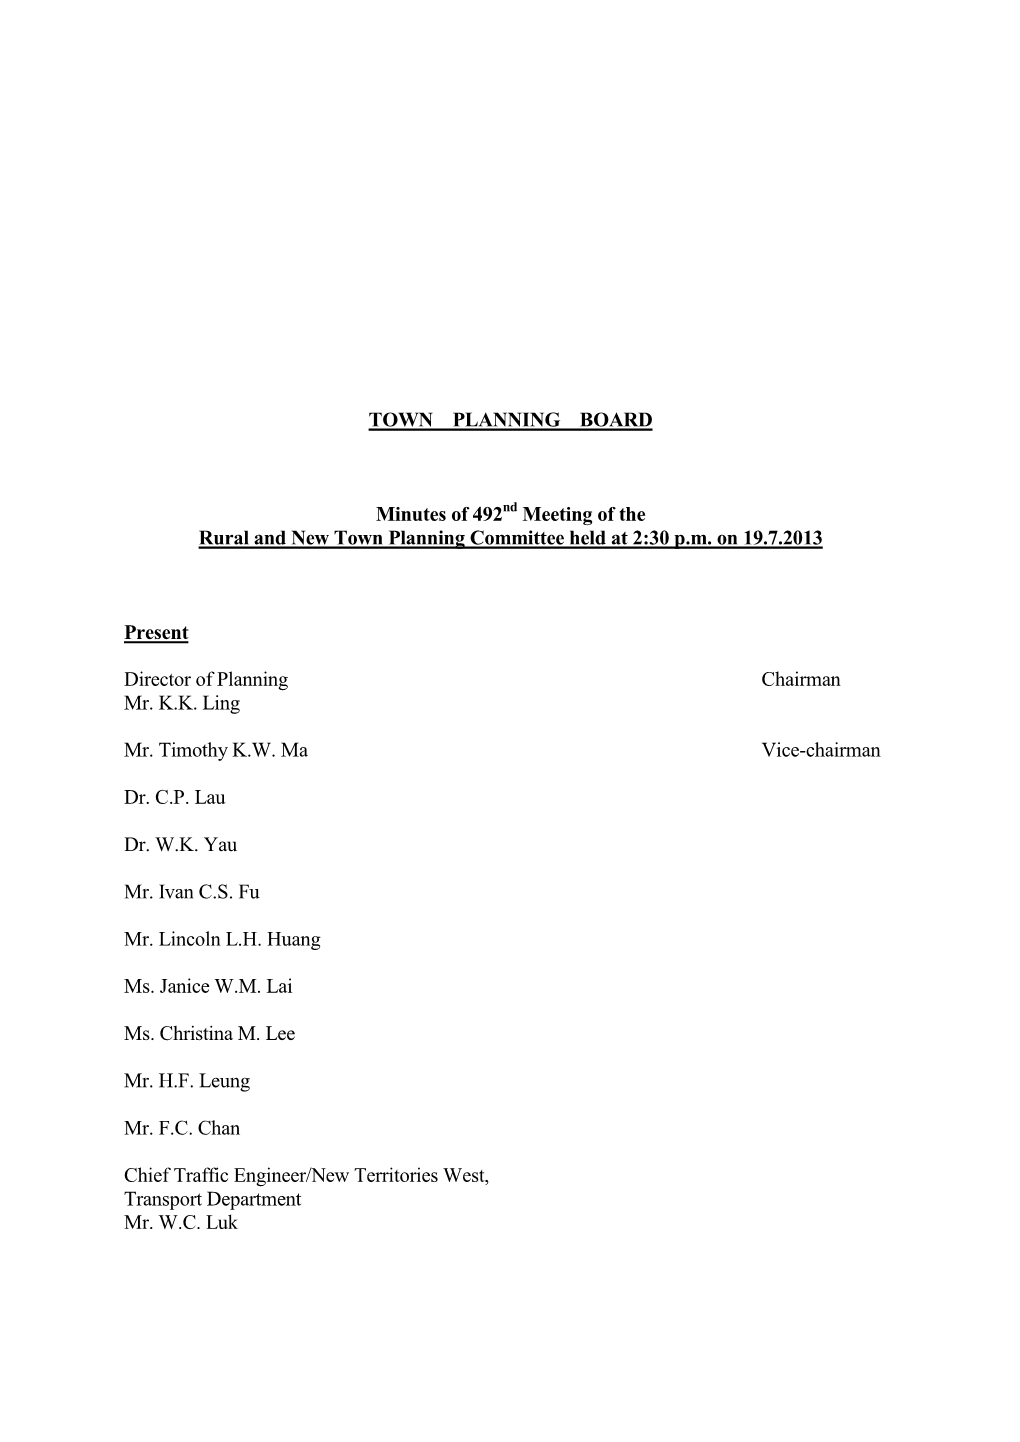 TOWN PLANNING BOARD Minutes of 492 Meeting of the Rural and New